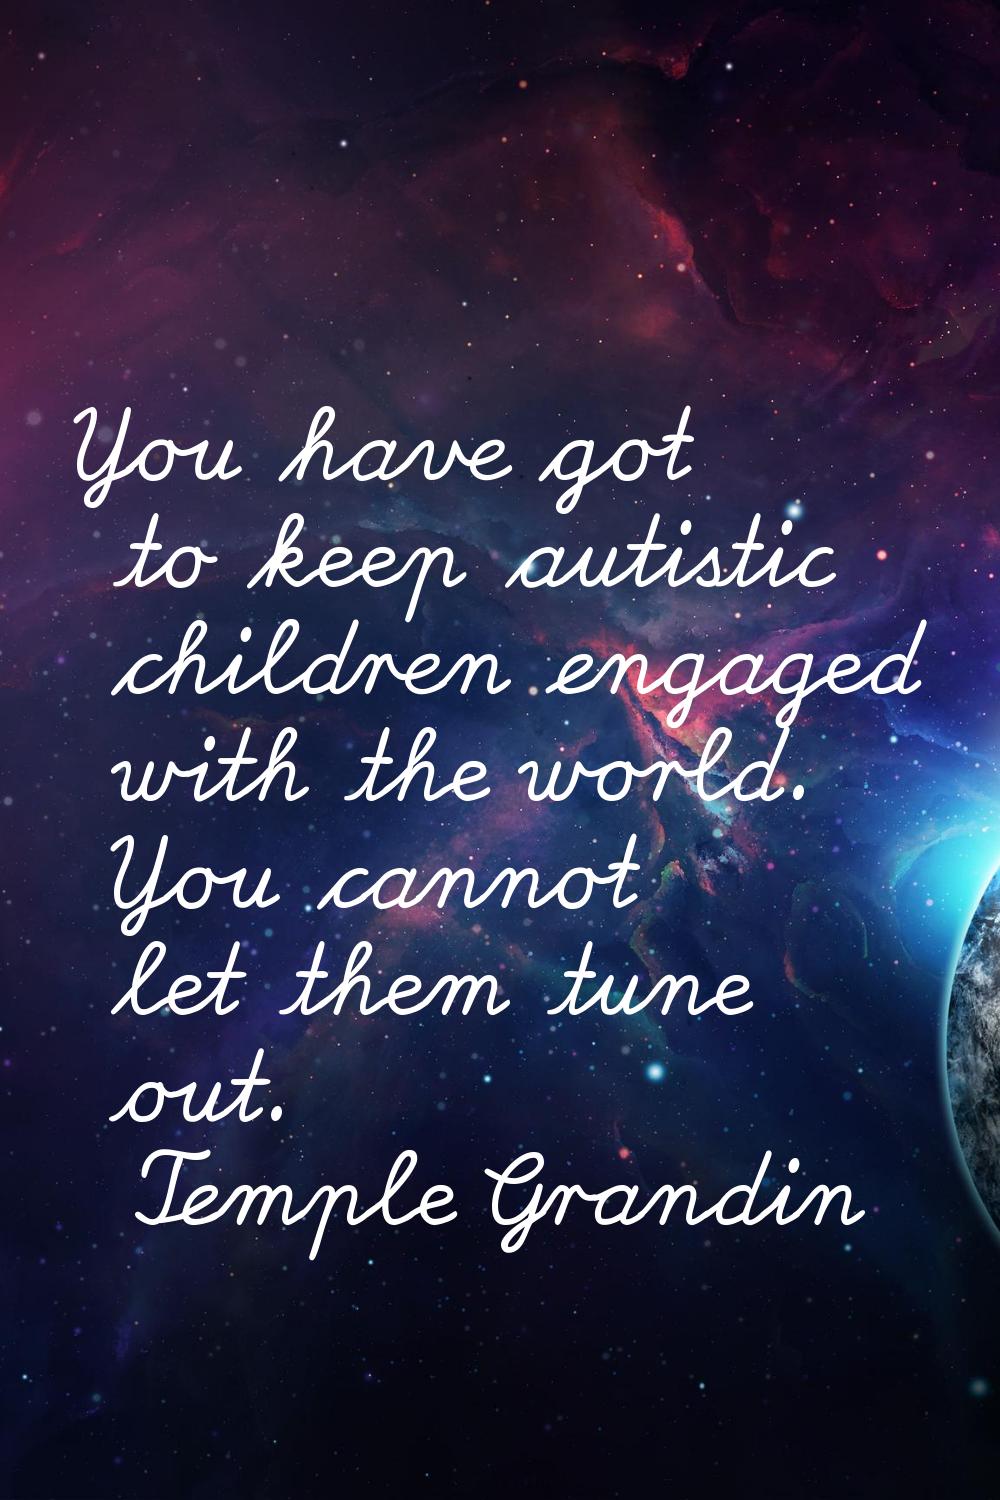 You have got to keep autistic children engaged with the world. You cannot let them tune out.